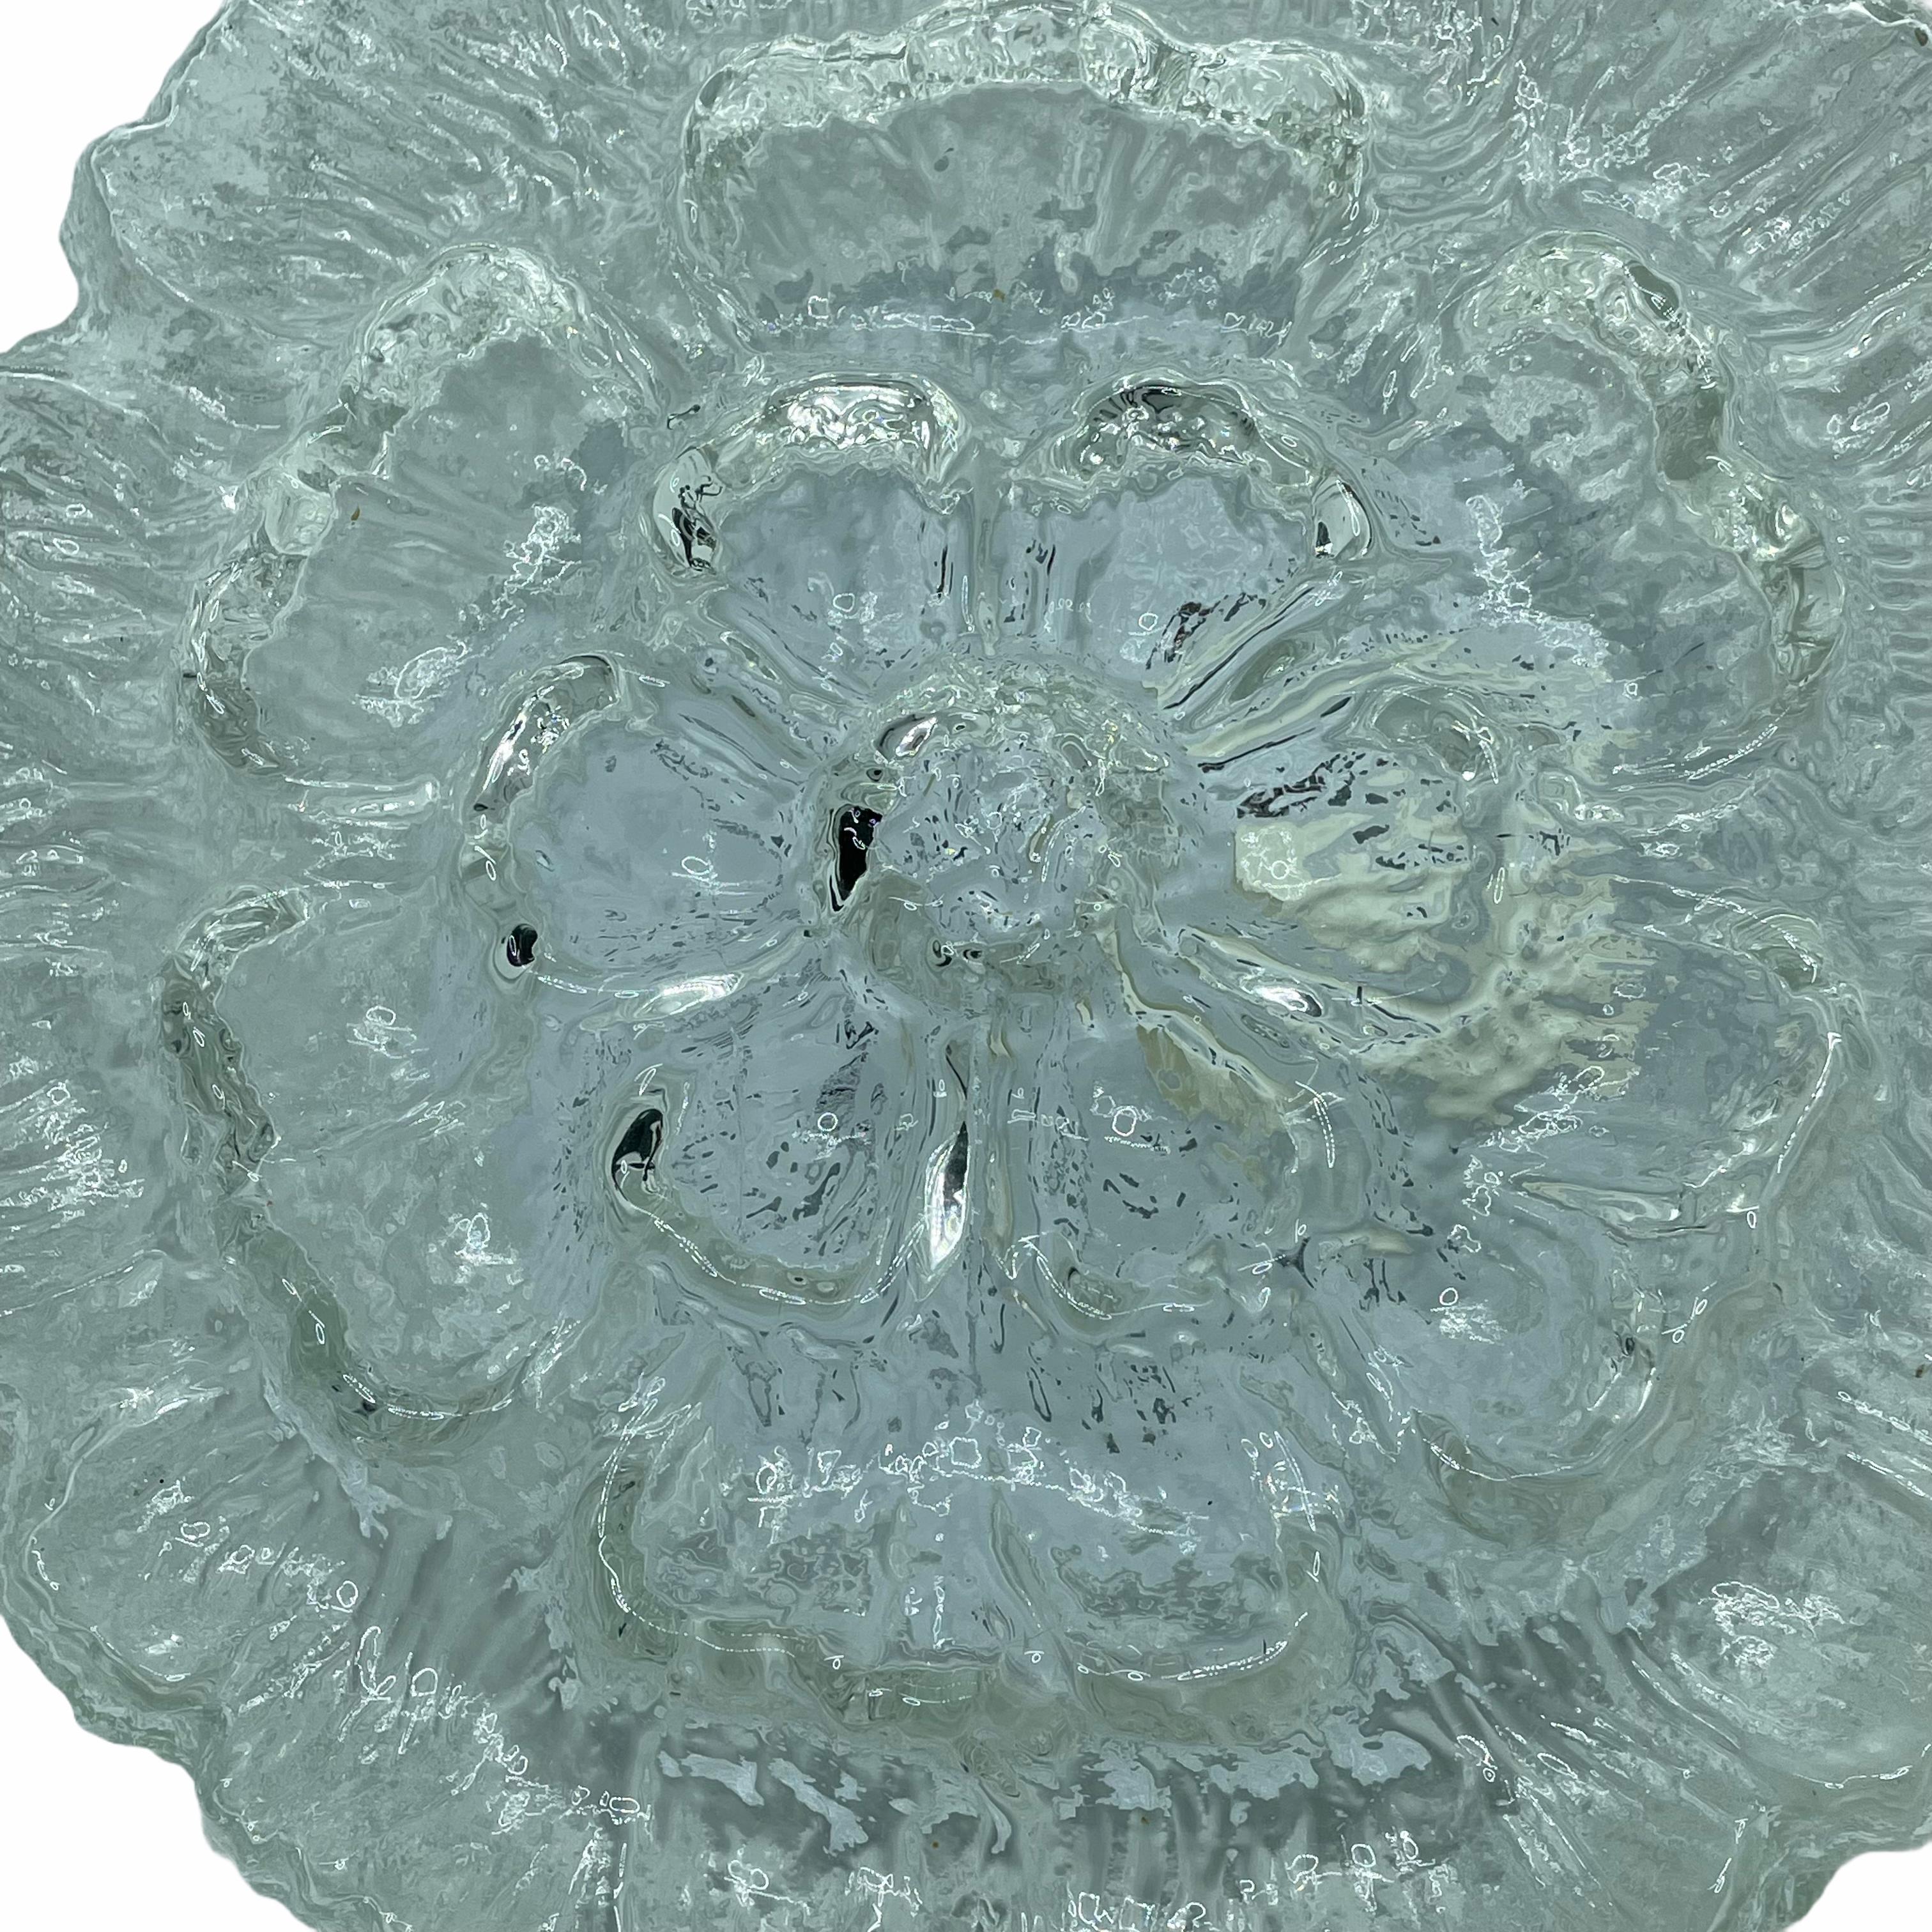 Large flower pattern clear glass flush mount. Made in Germany by Massive Leuchten. Gorgeous textured glass flush mount with metal fixture. The Fixture requires one European E27 / 110 Volt Edison bulb, up to 60 watts. You can also use it as a sconce